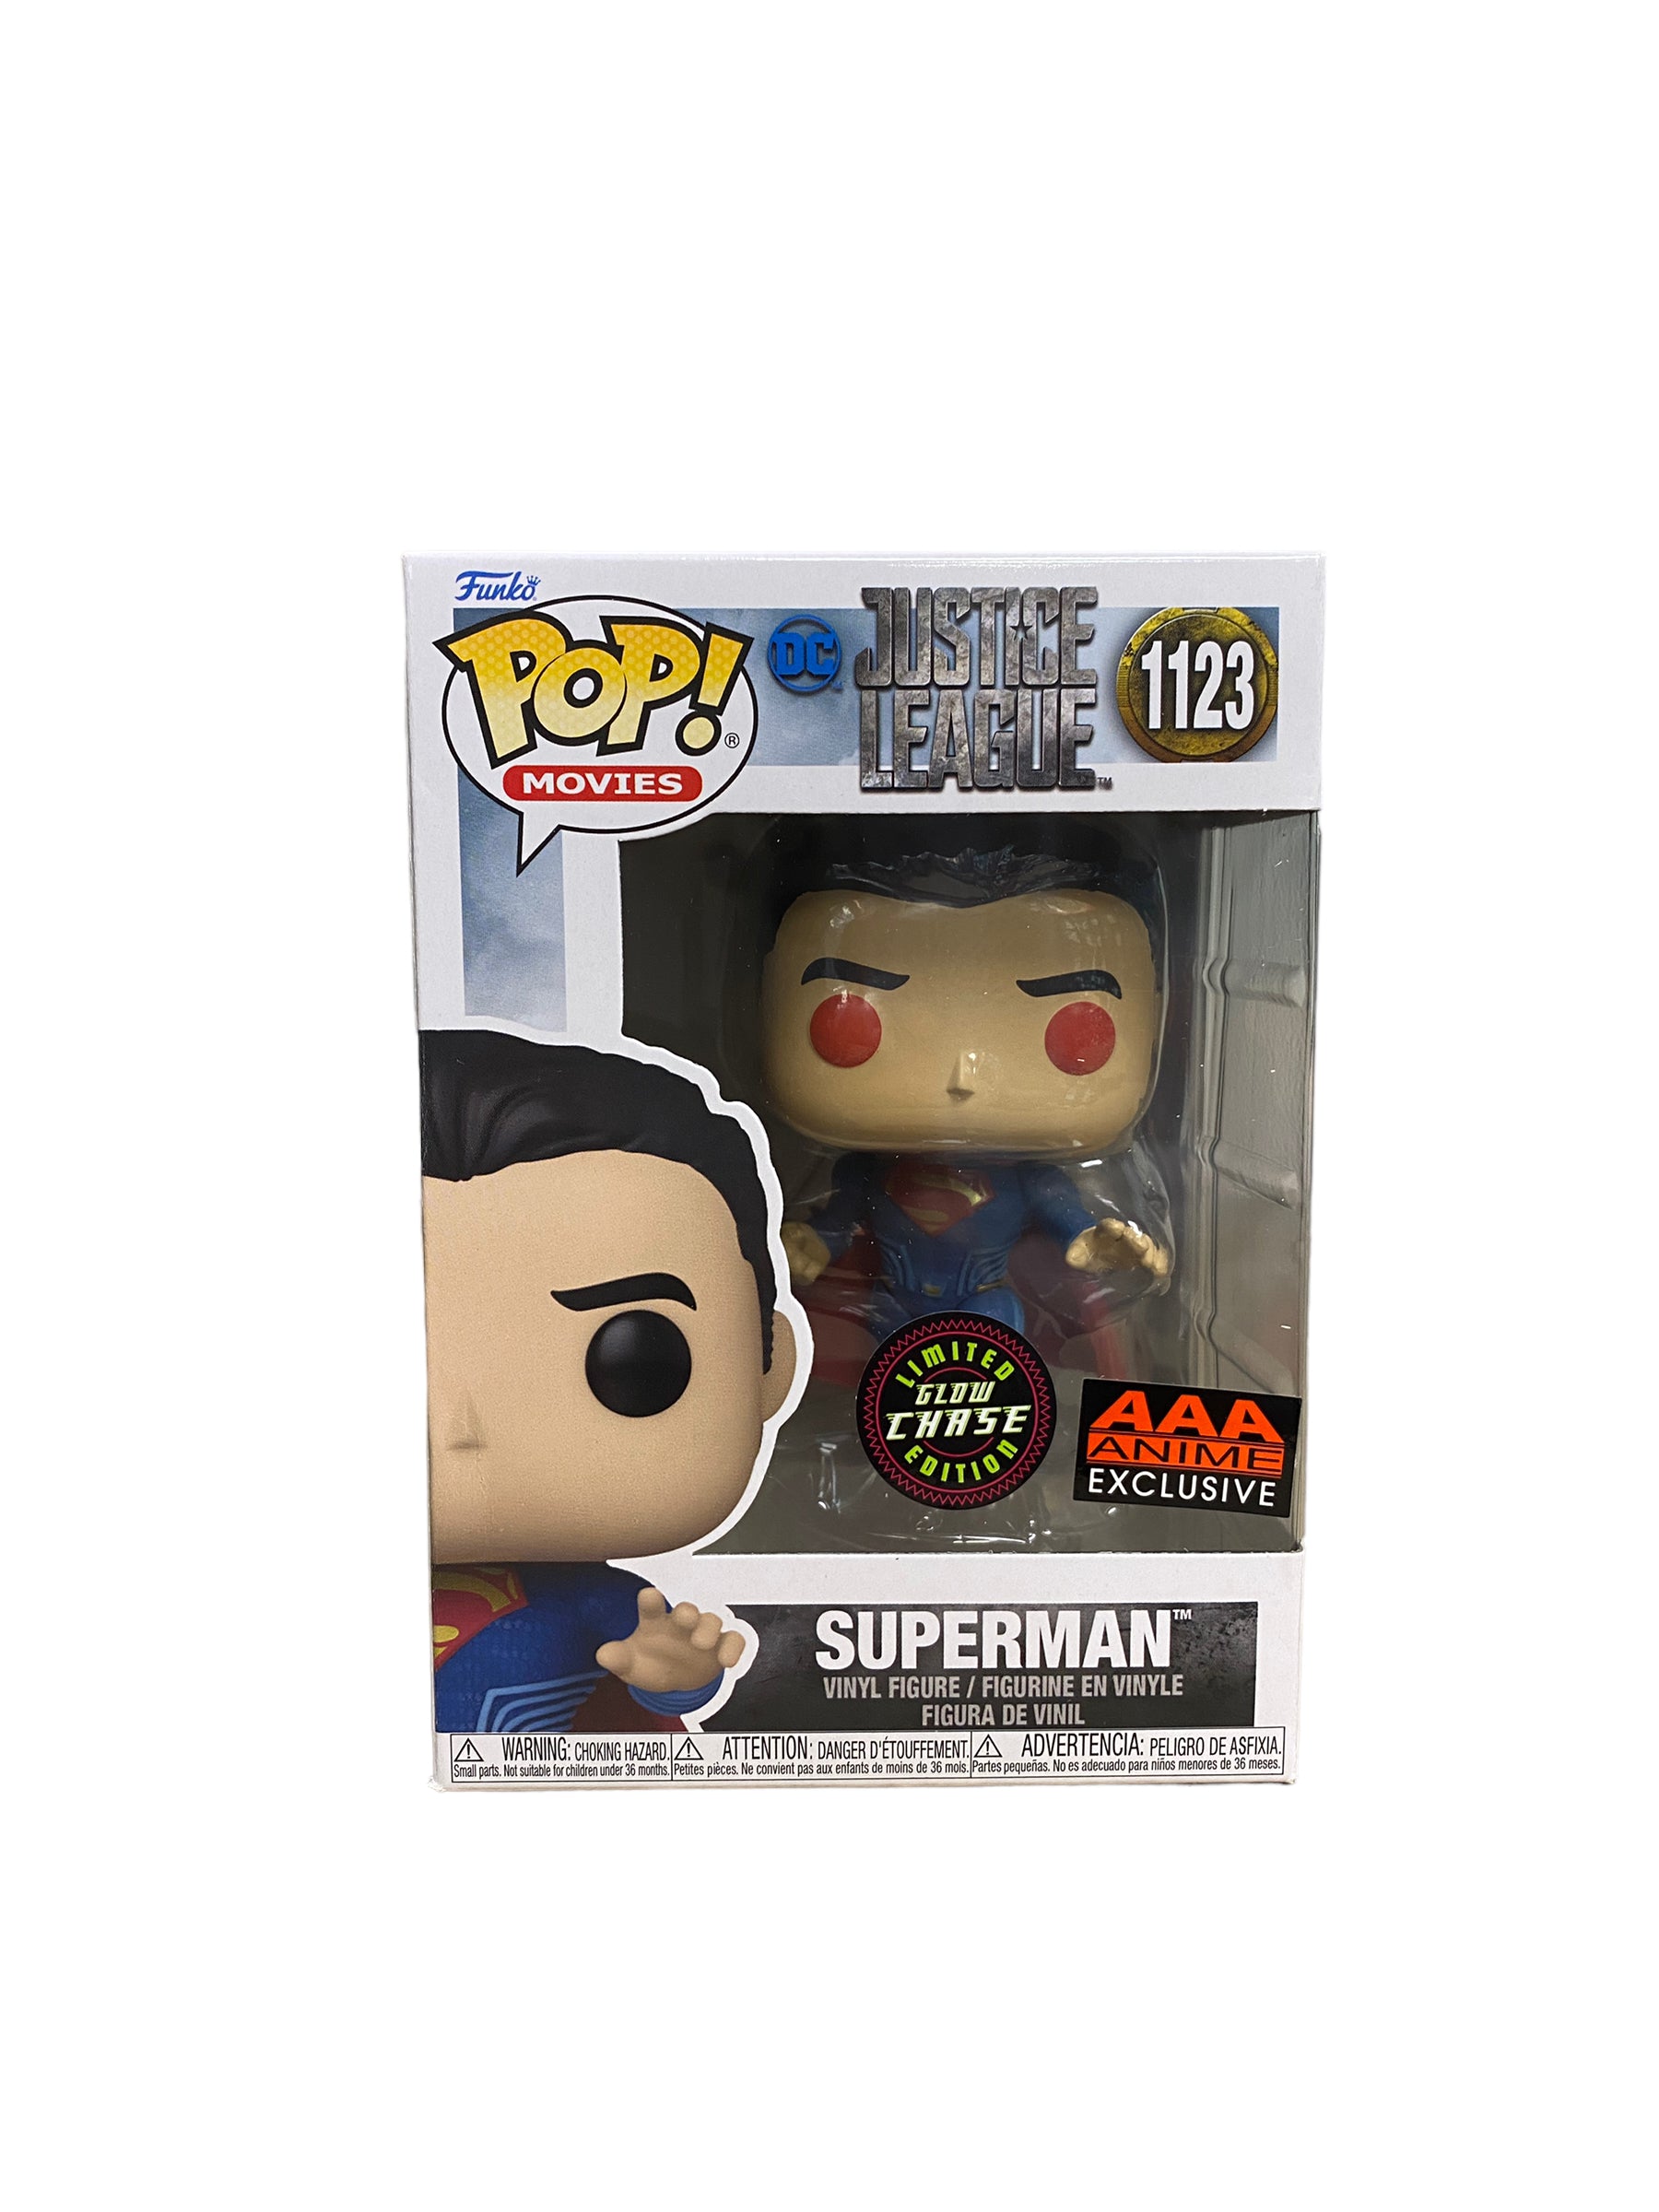 Superman #1123 (Glow Chase) Funko Pop! - Justice League - AAA Anime Exclusive - Condition 8/10